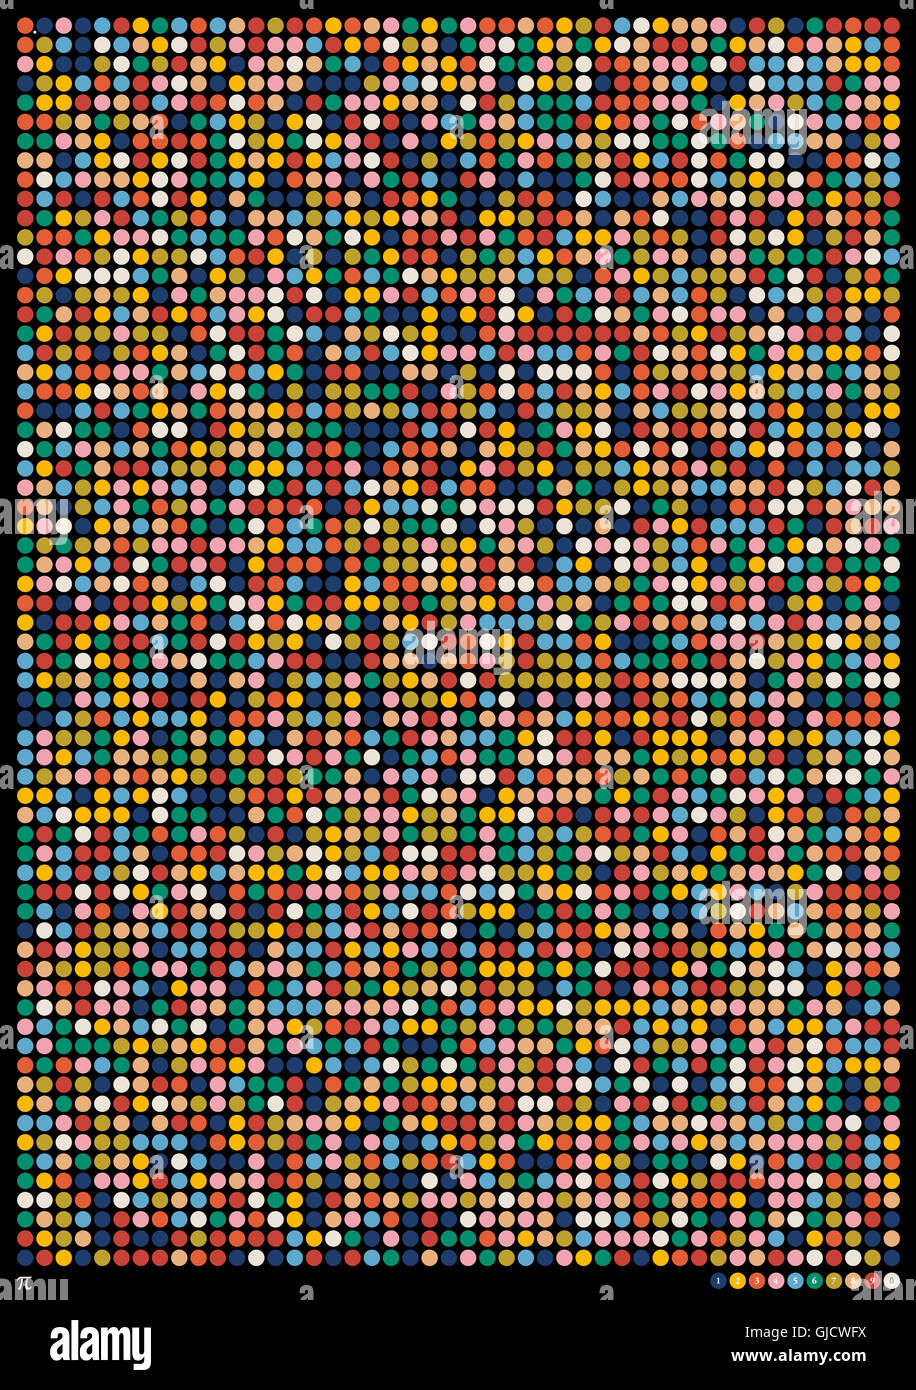 Coloured circles are showing the number PI. Every colour circle is standing for a decimal place. The colours are defining the decimal places from 0 to 9. Stock Photo